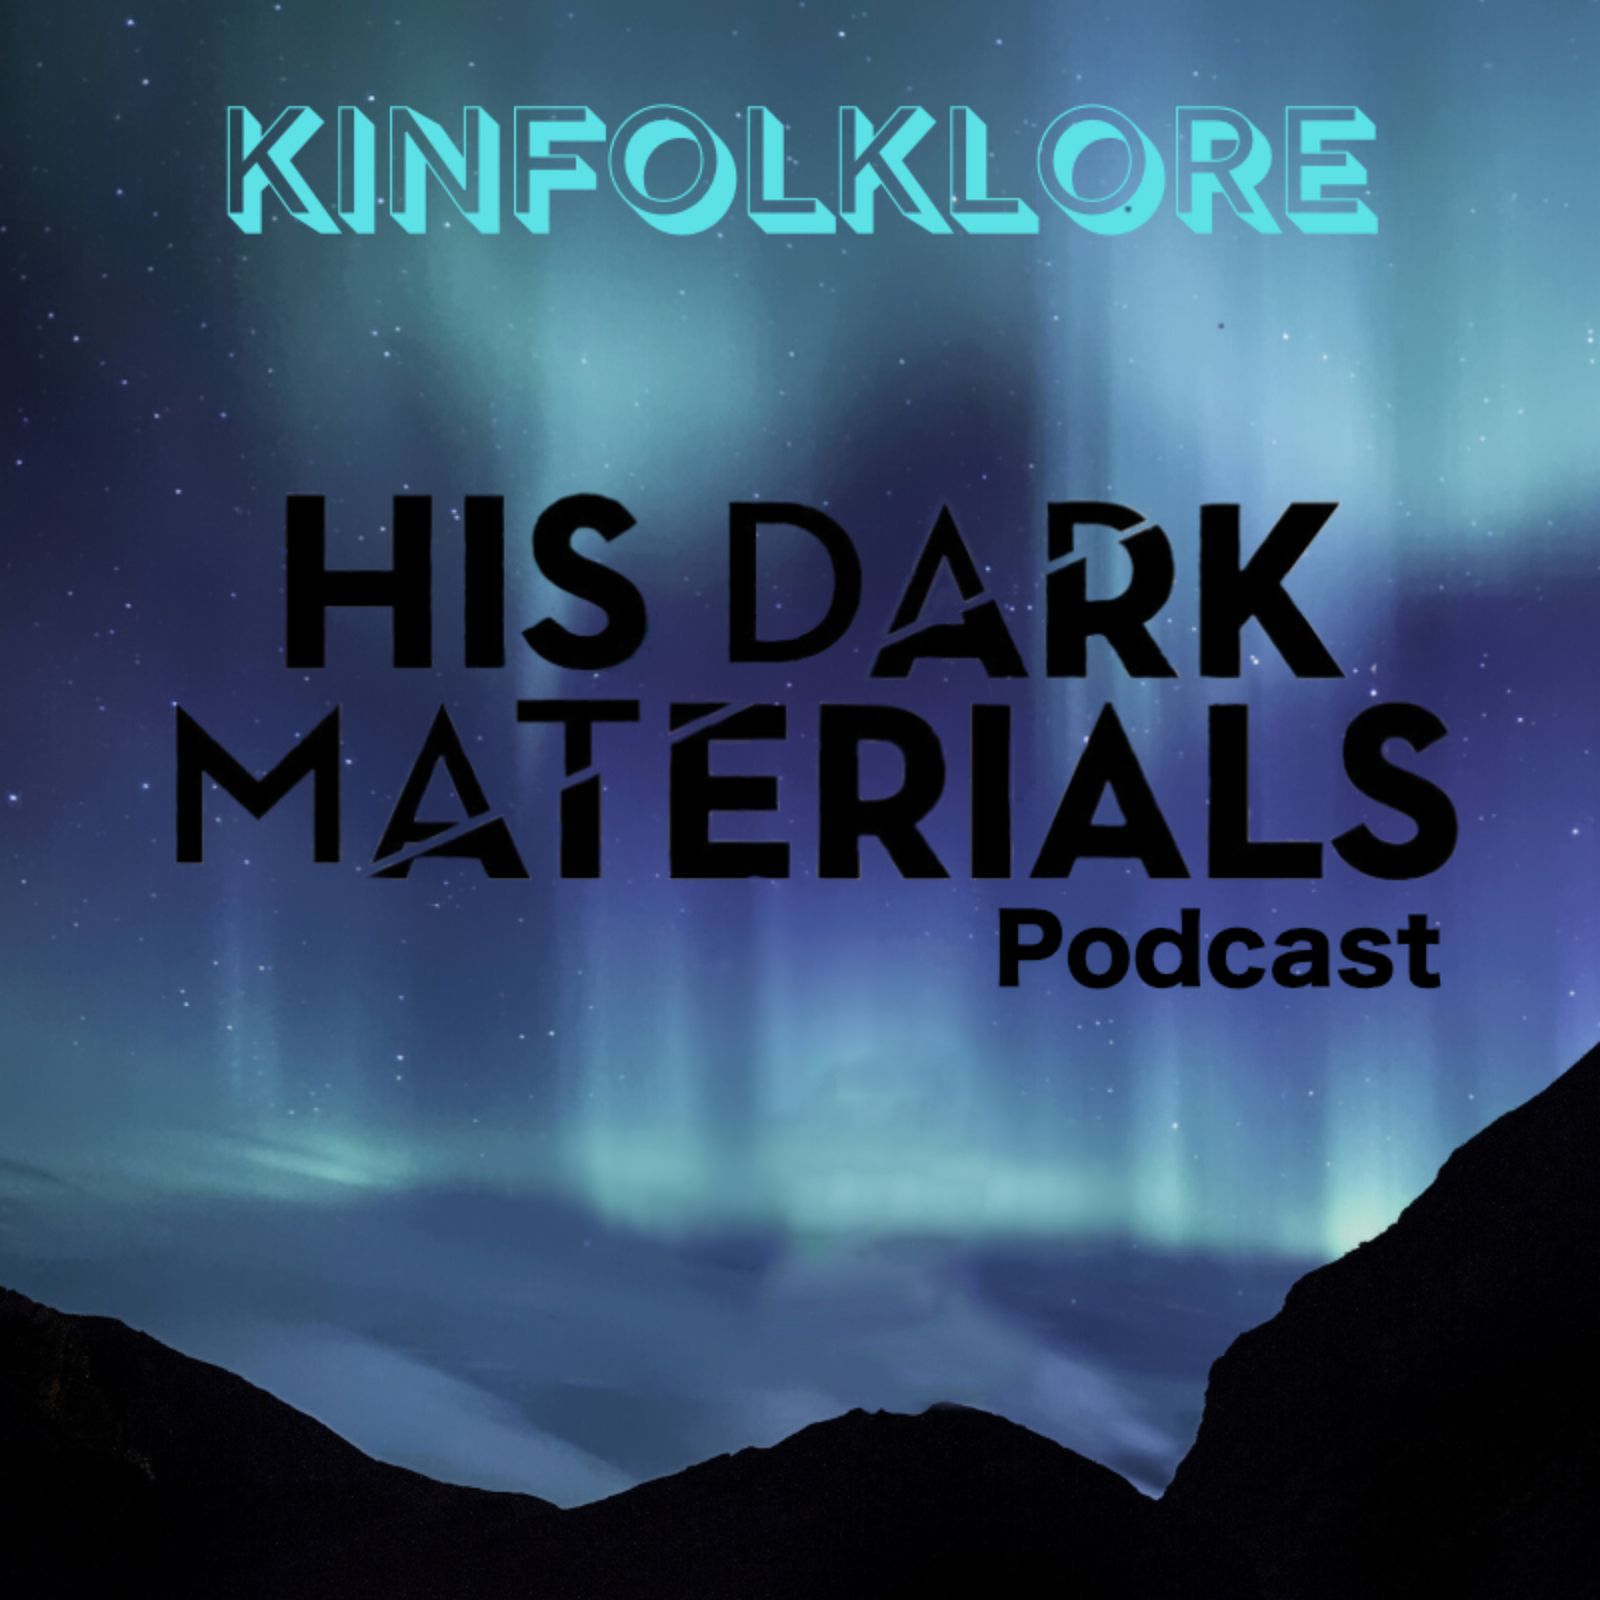 S5 Ep6: Kinfolklore: His Dark Materials Sn.2 Episode 6 (Malice)